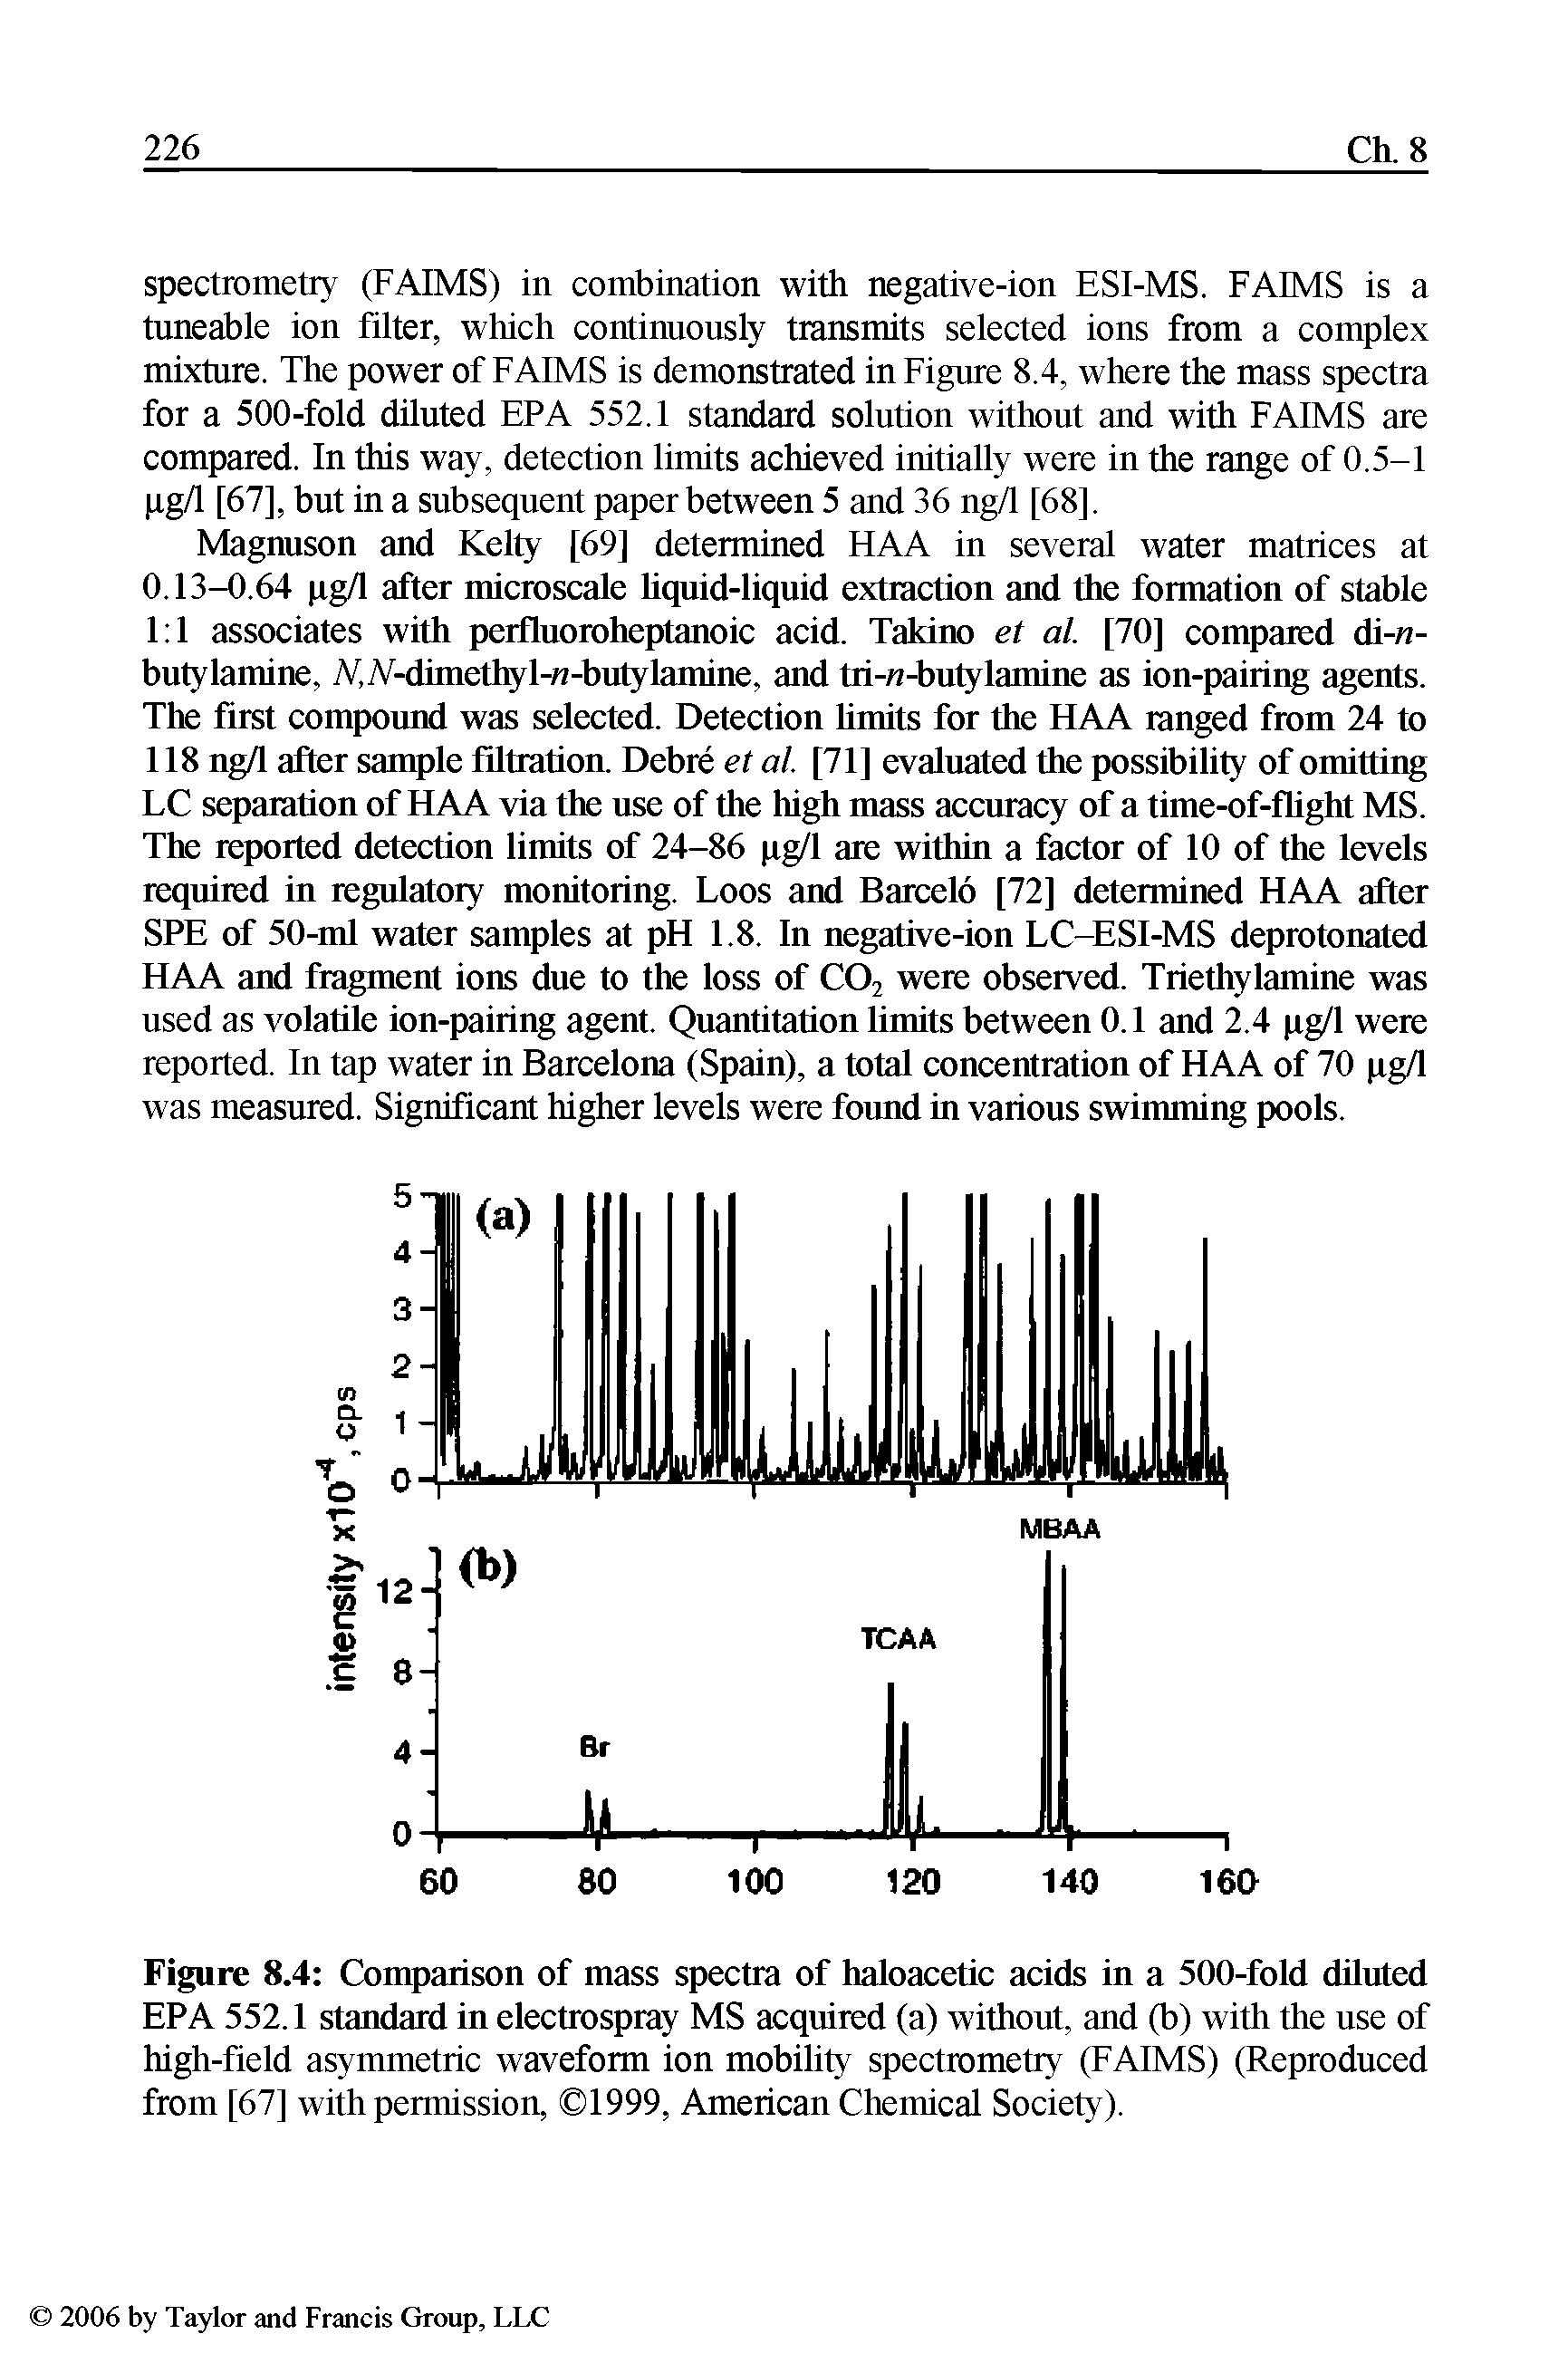 Figure 8.4 Comparison of mass spectra of haloacetic acids in a 500-fold diluted EPA 552.1 standard in electrospray MS acquired (a) without, and (b) with the use of high-field asymmetric waveform ion mobility spectrometry (FAIMS) (Reproduced from [67] with permission, 1999, American Chemical Society).